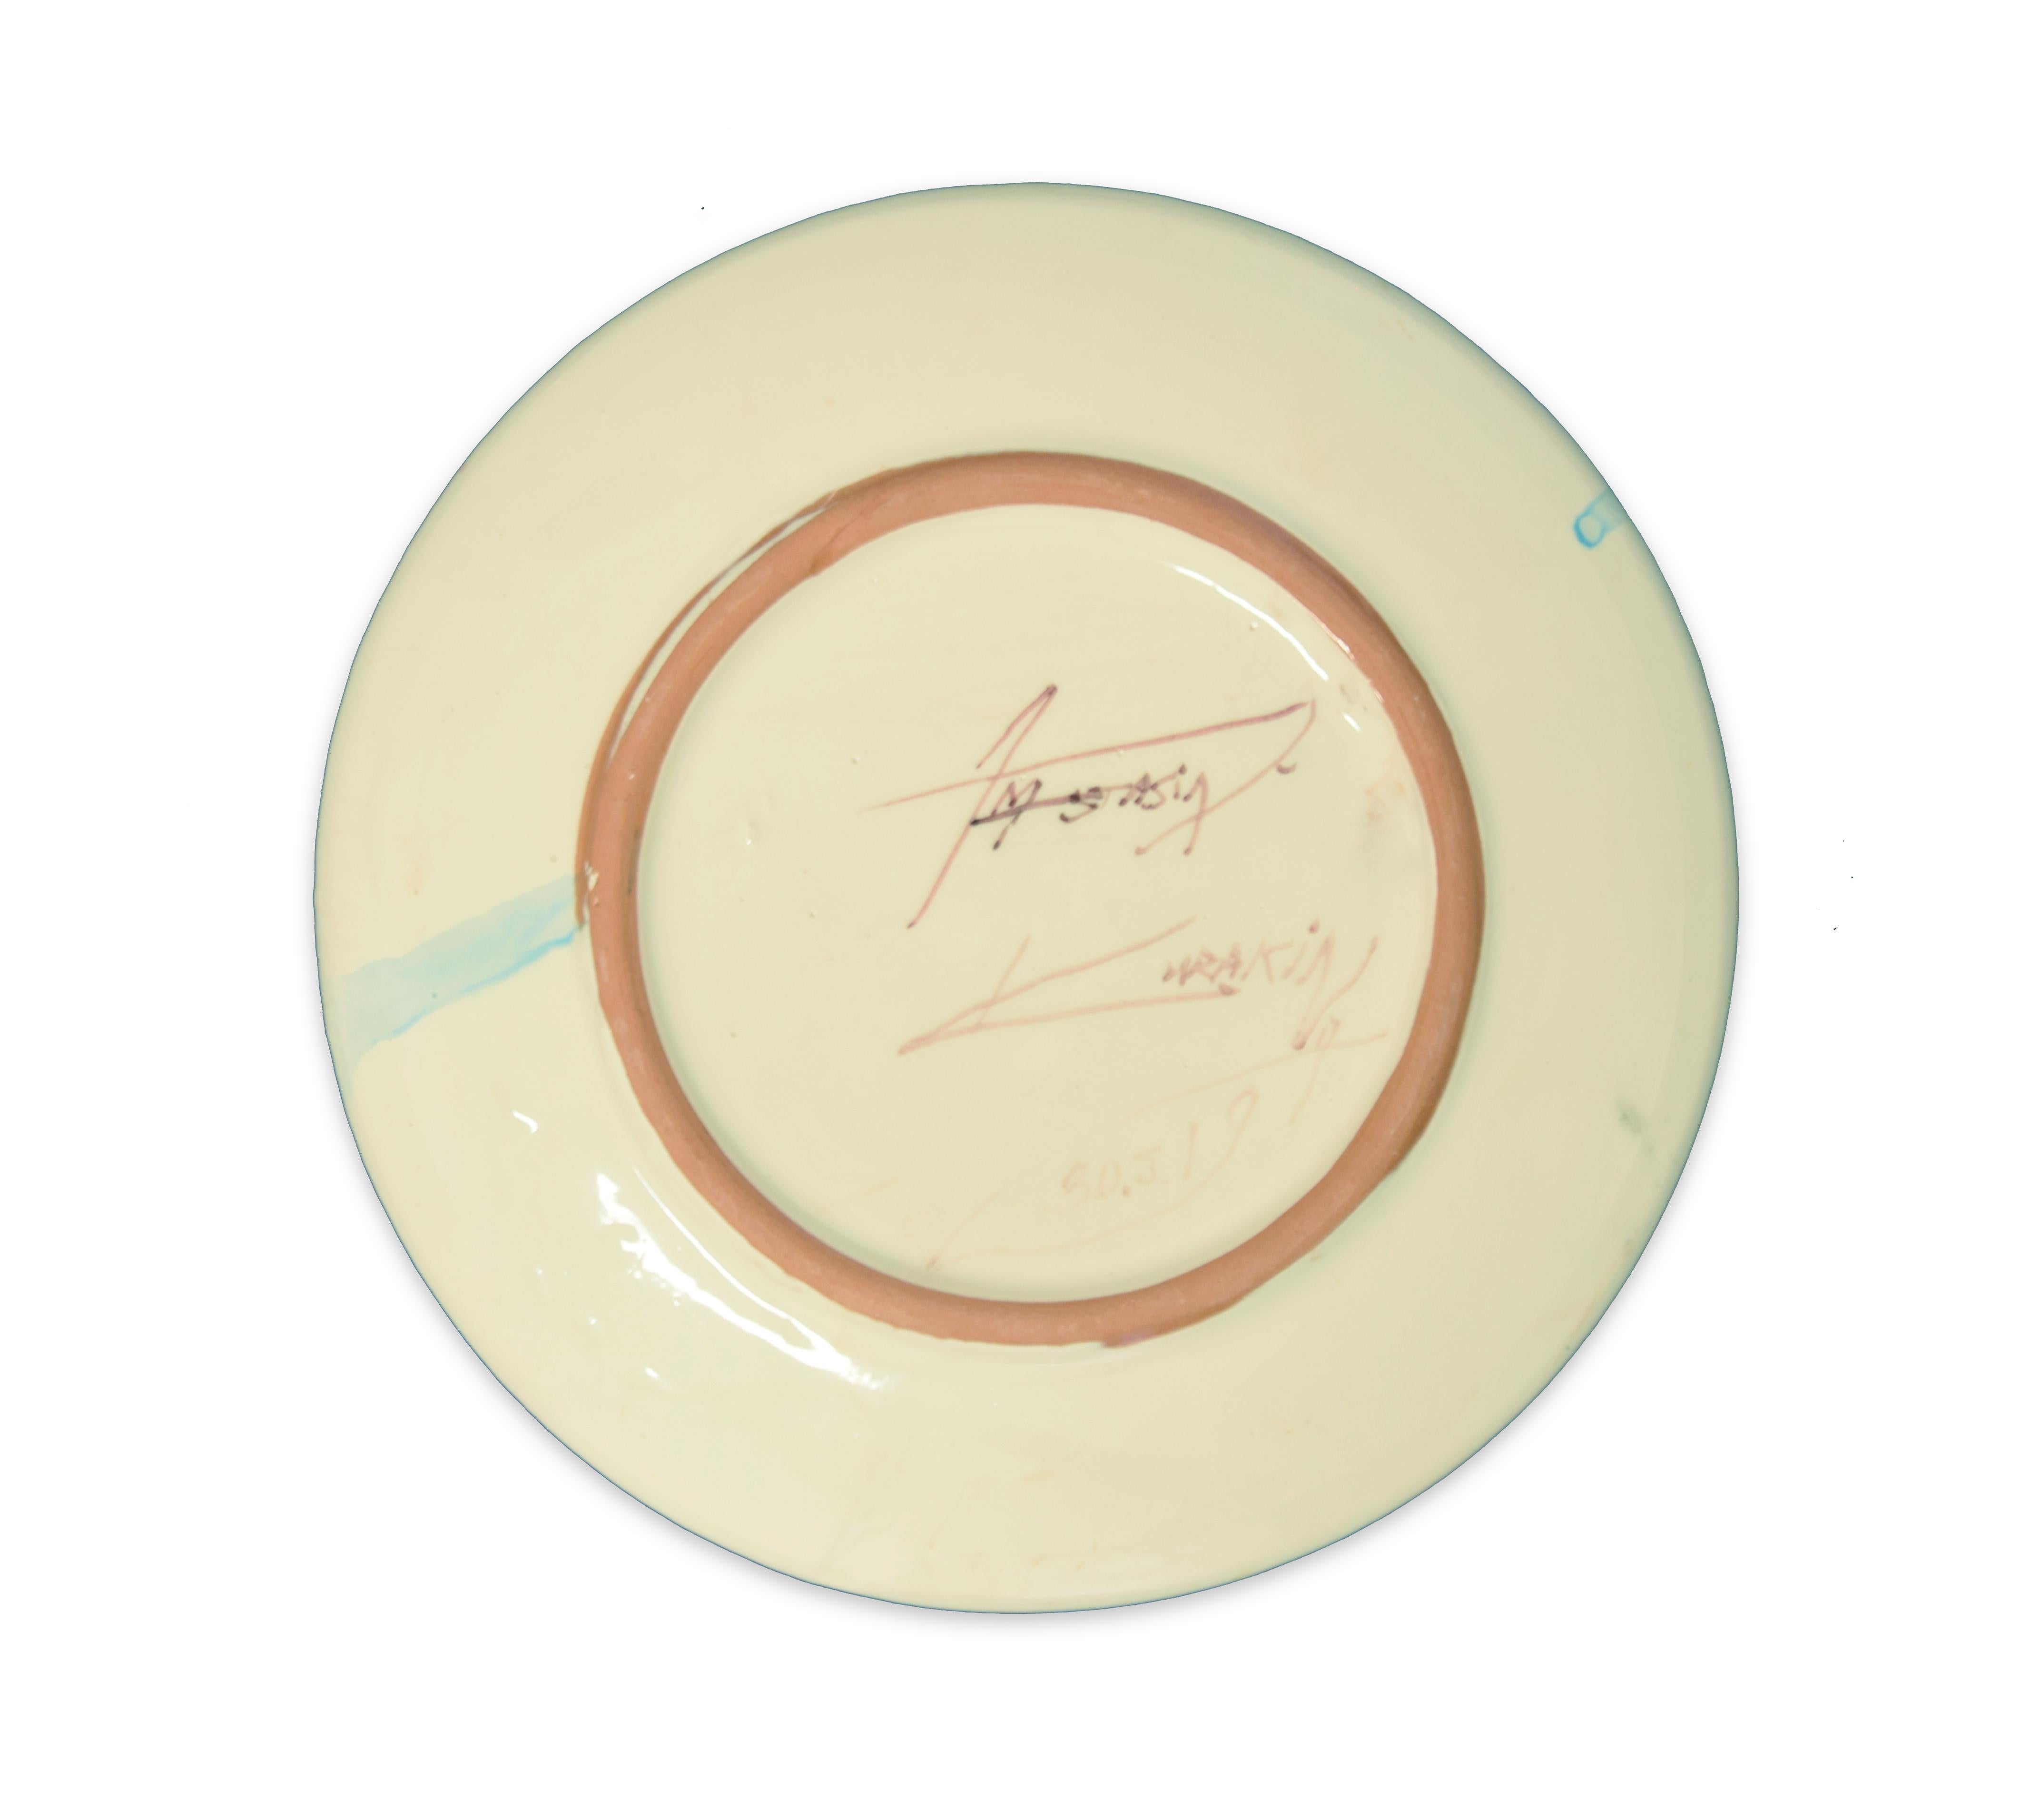 Looking at You is a hand-made flat ceramic dish realized by the Russian emerging artist, Anastasia Kurakina in 2019. 

Signed and dated on the back at the center.

This is a  beautiful ceramic dish representing a stylized female portrait of clear